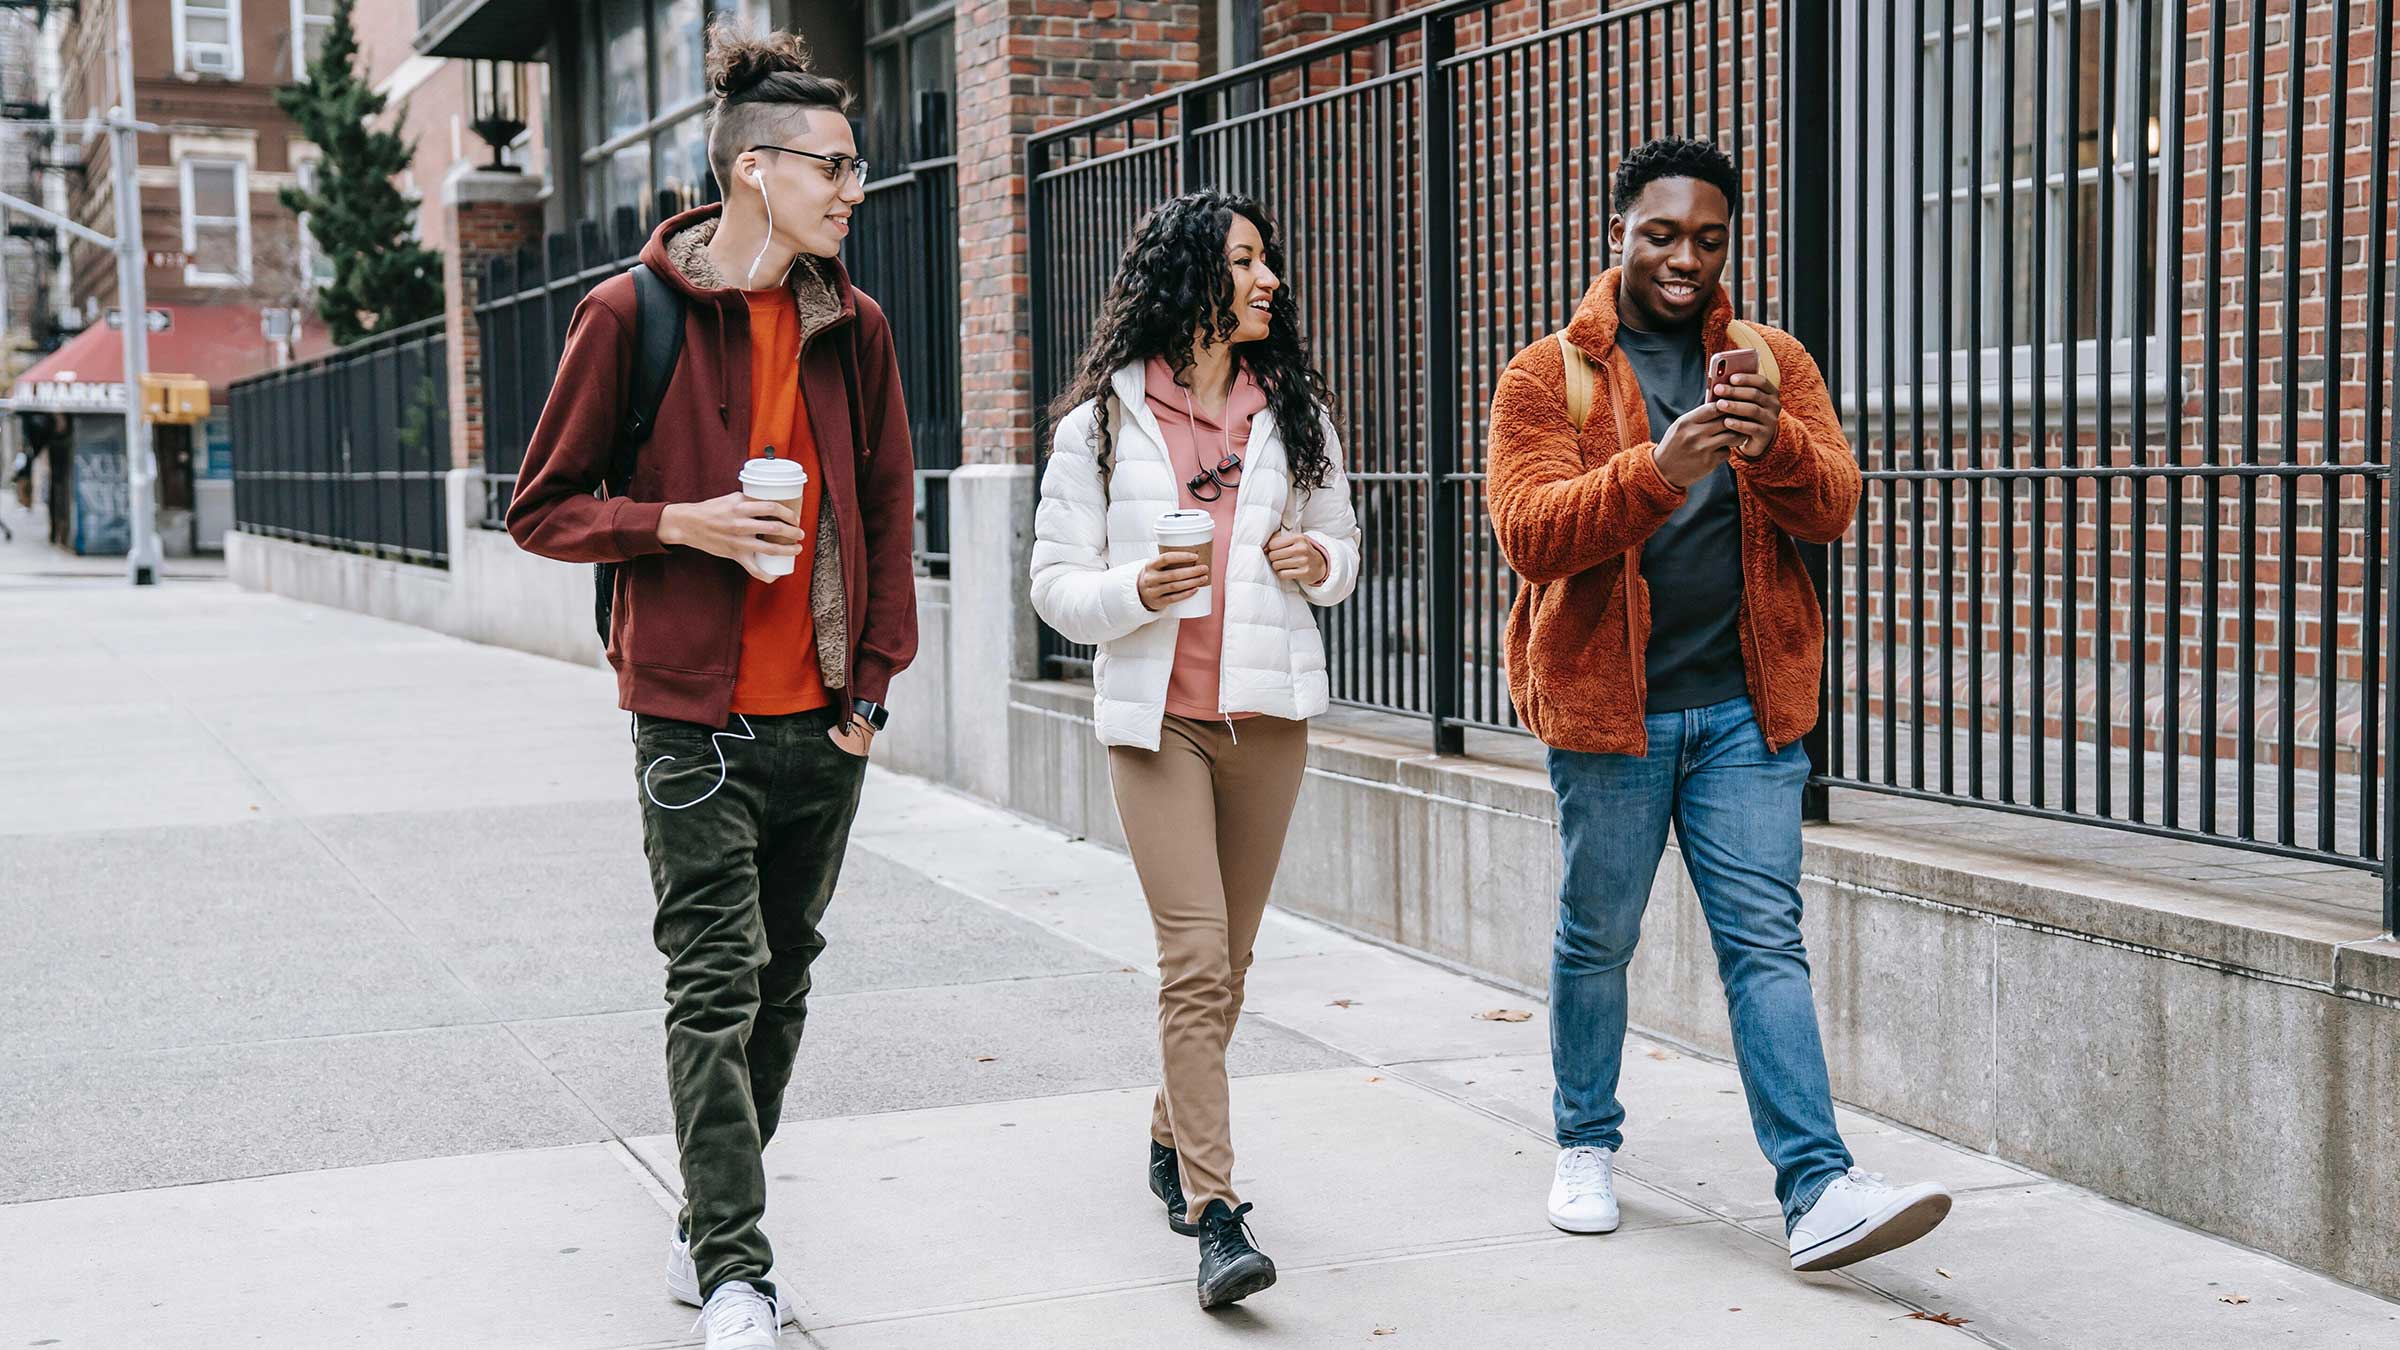 3 youths walking, 2 holding coffee cups and one looking at phone